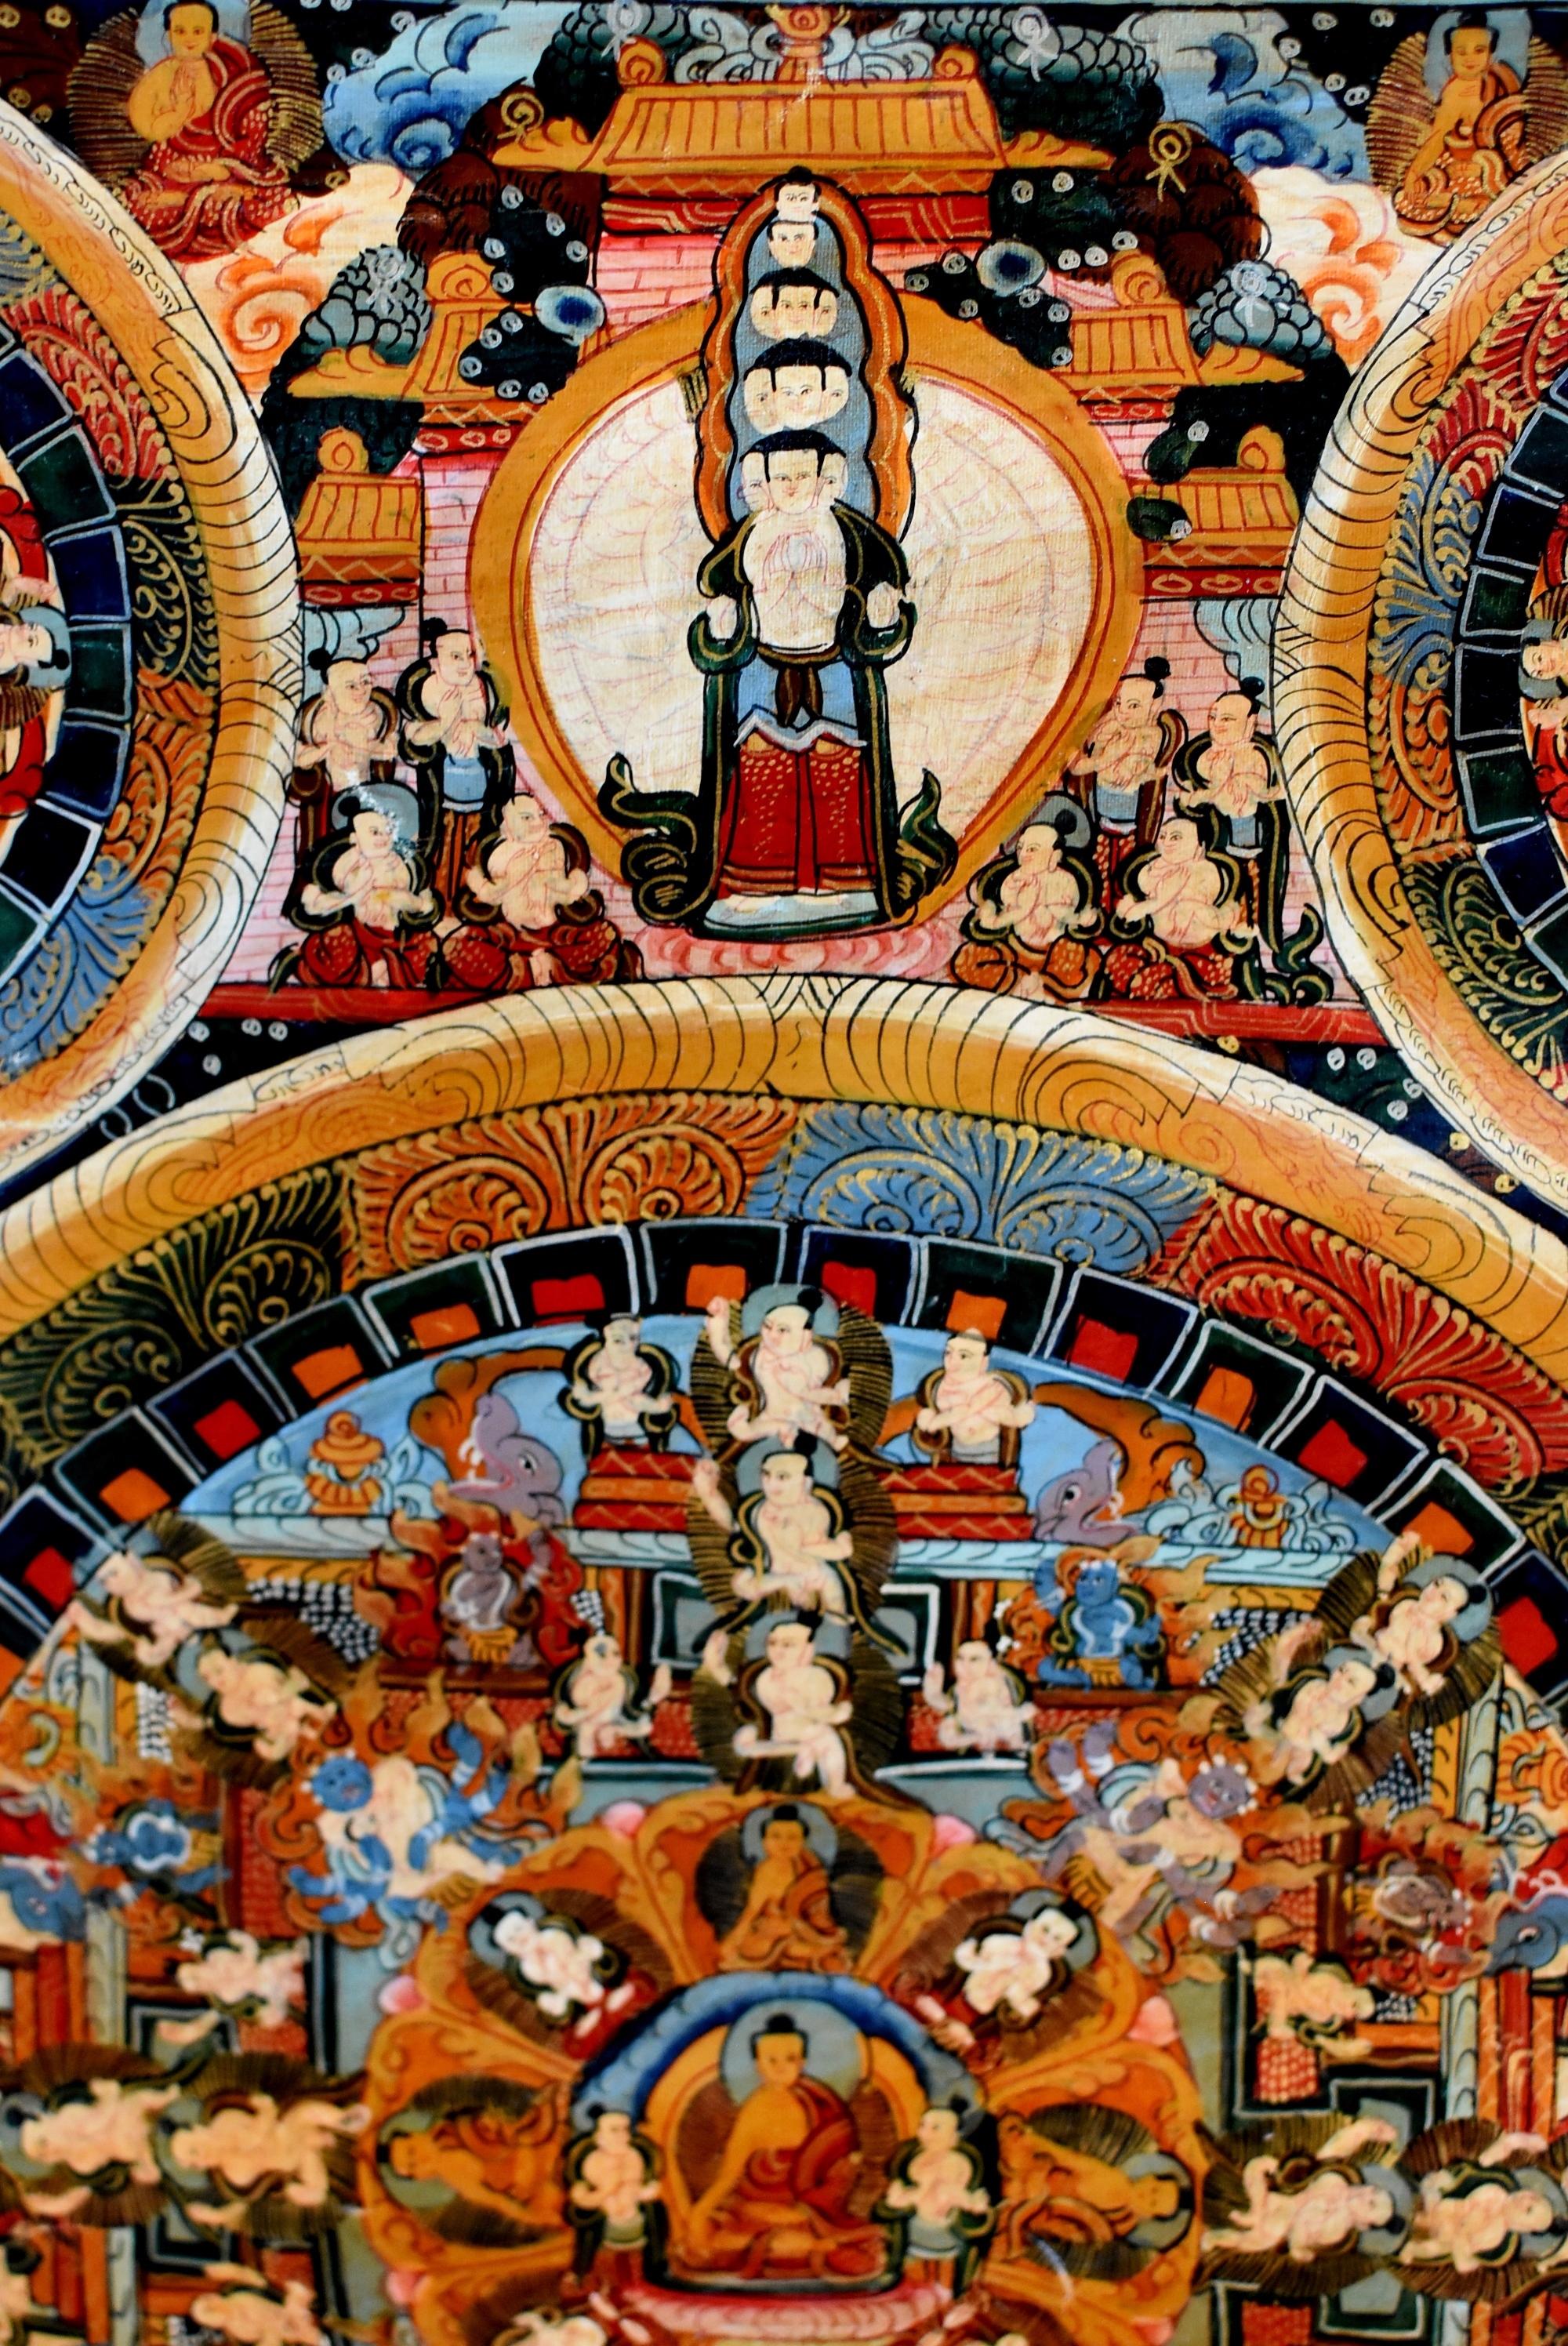 An one of kind rare offering. This large, vintage, hand painted Thangka depicts Buddha's life cycle. The extremely complex painting demonstrates hundreds of Buddha images, from his attainment of enlightenment to many manifestation as saviors, from